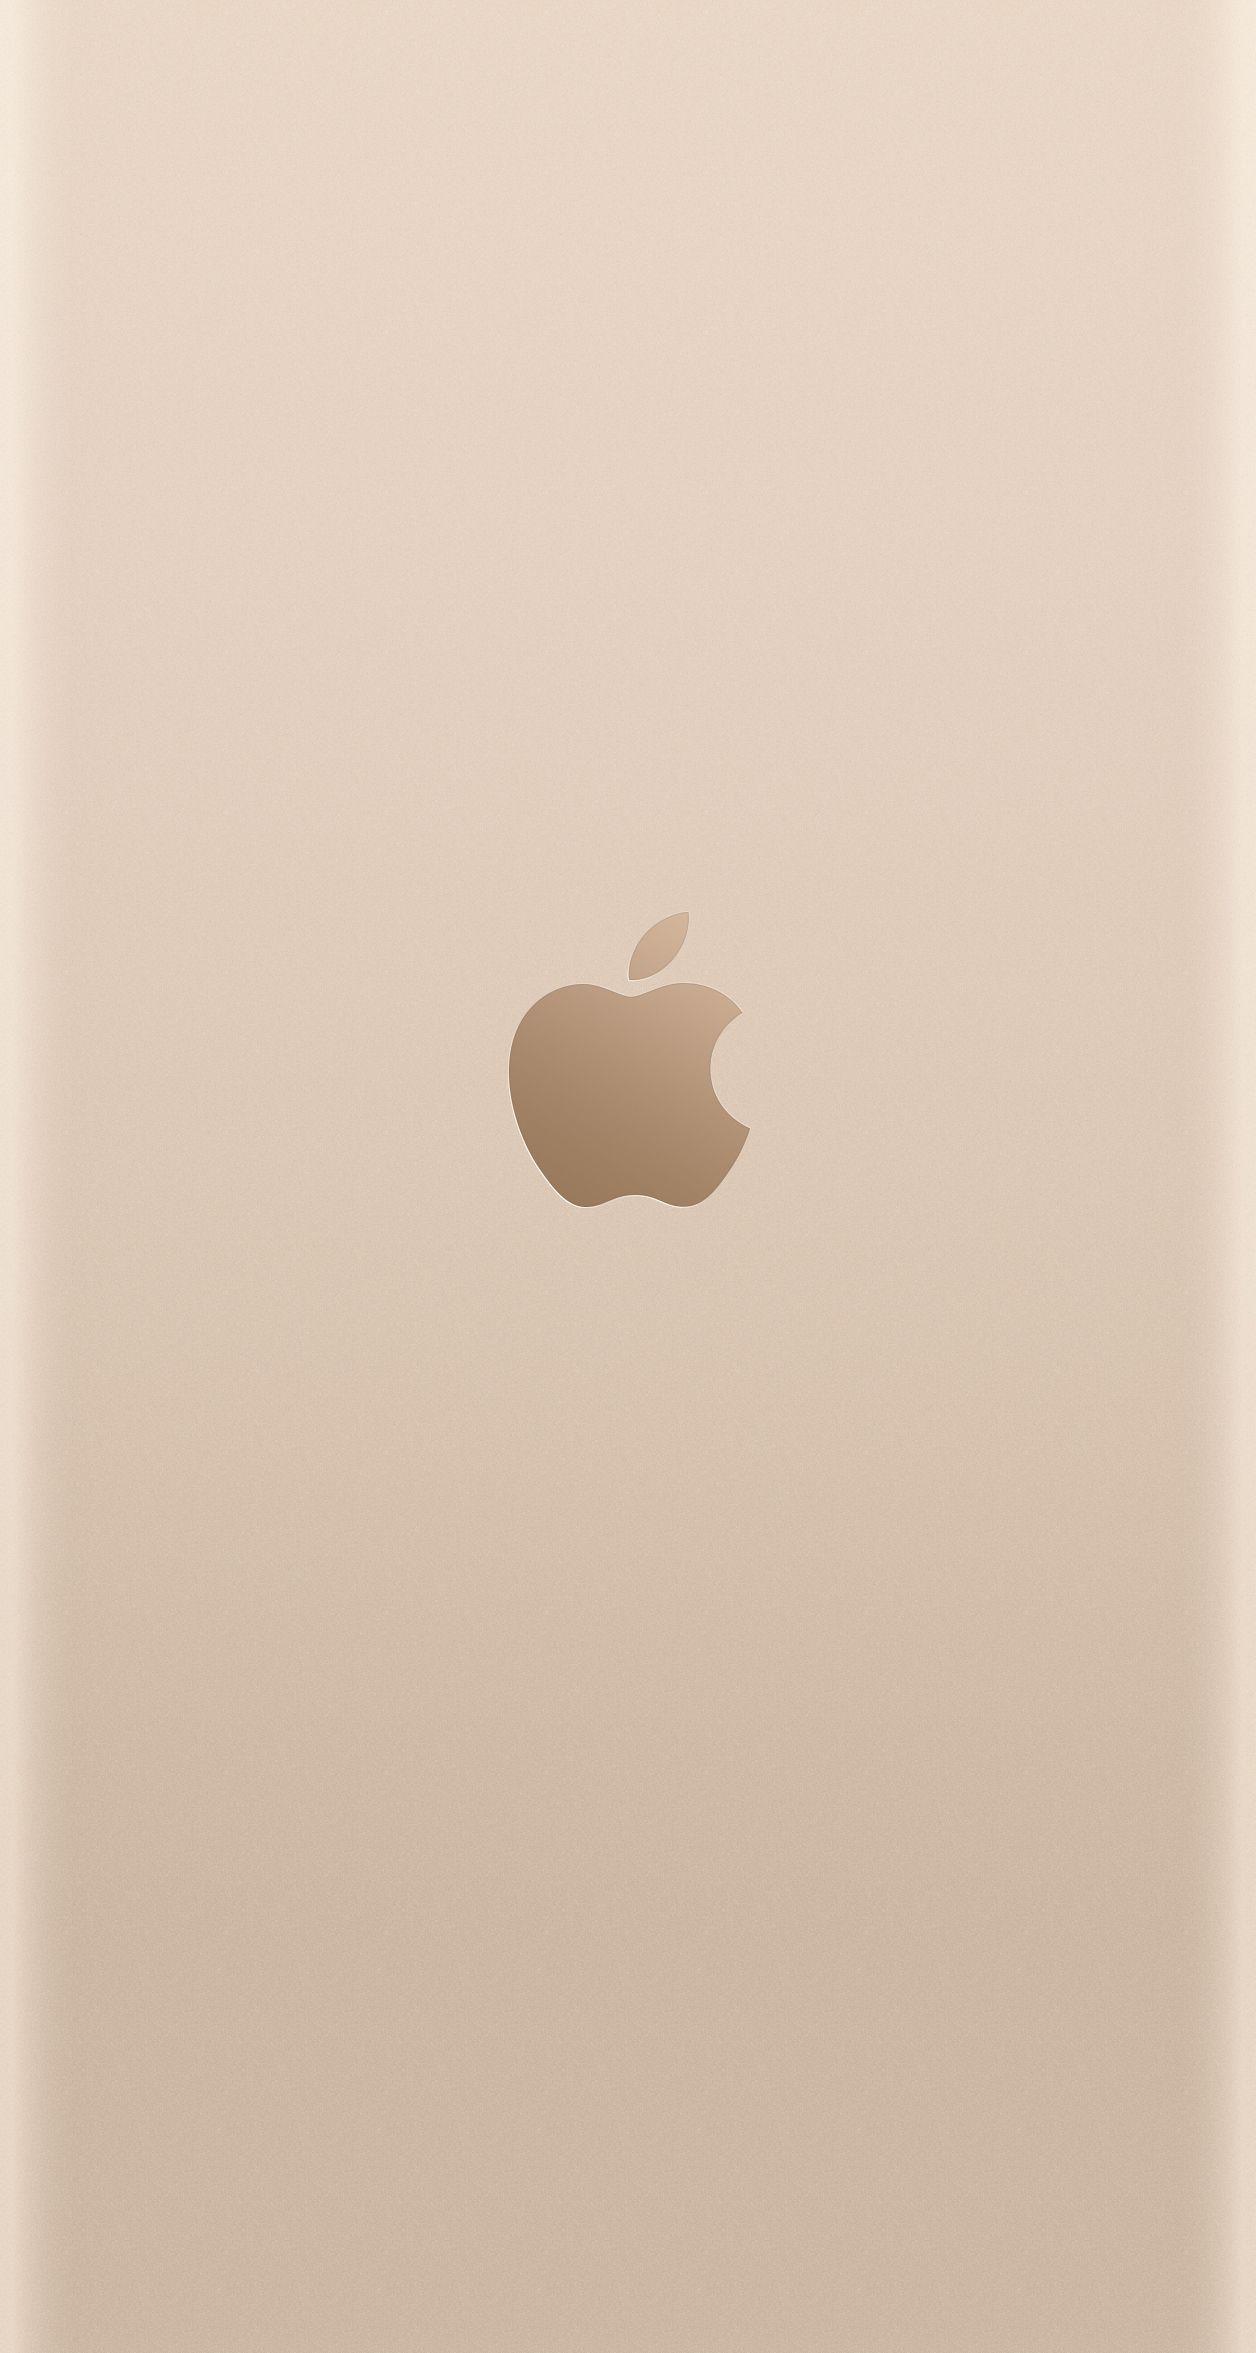 Gold iPhone Logo - Apple logo wallpapers for iPhone 6